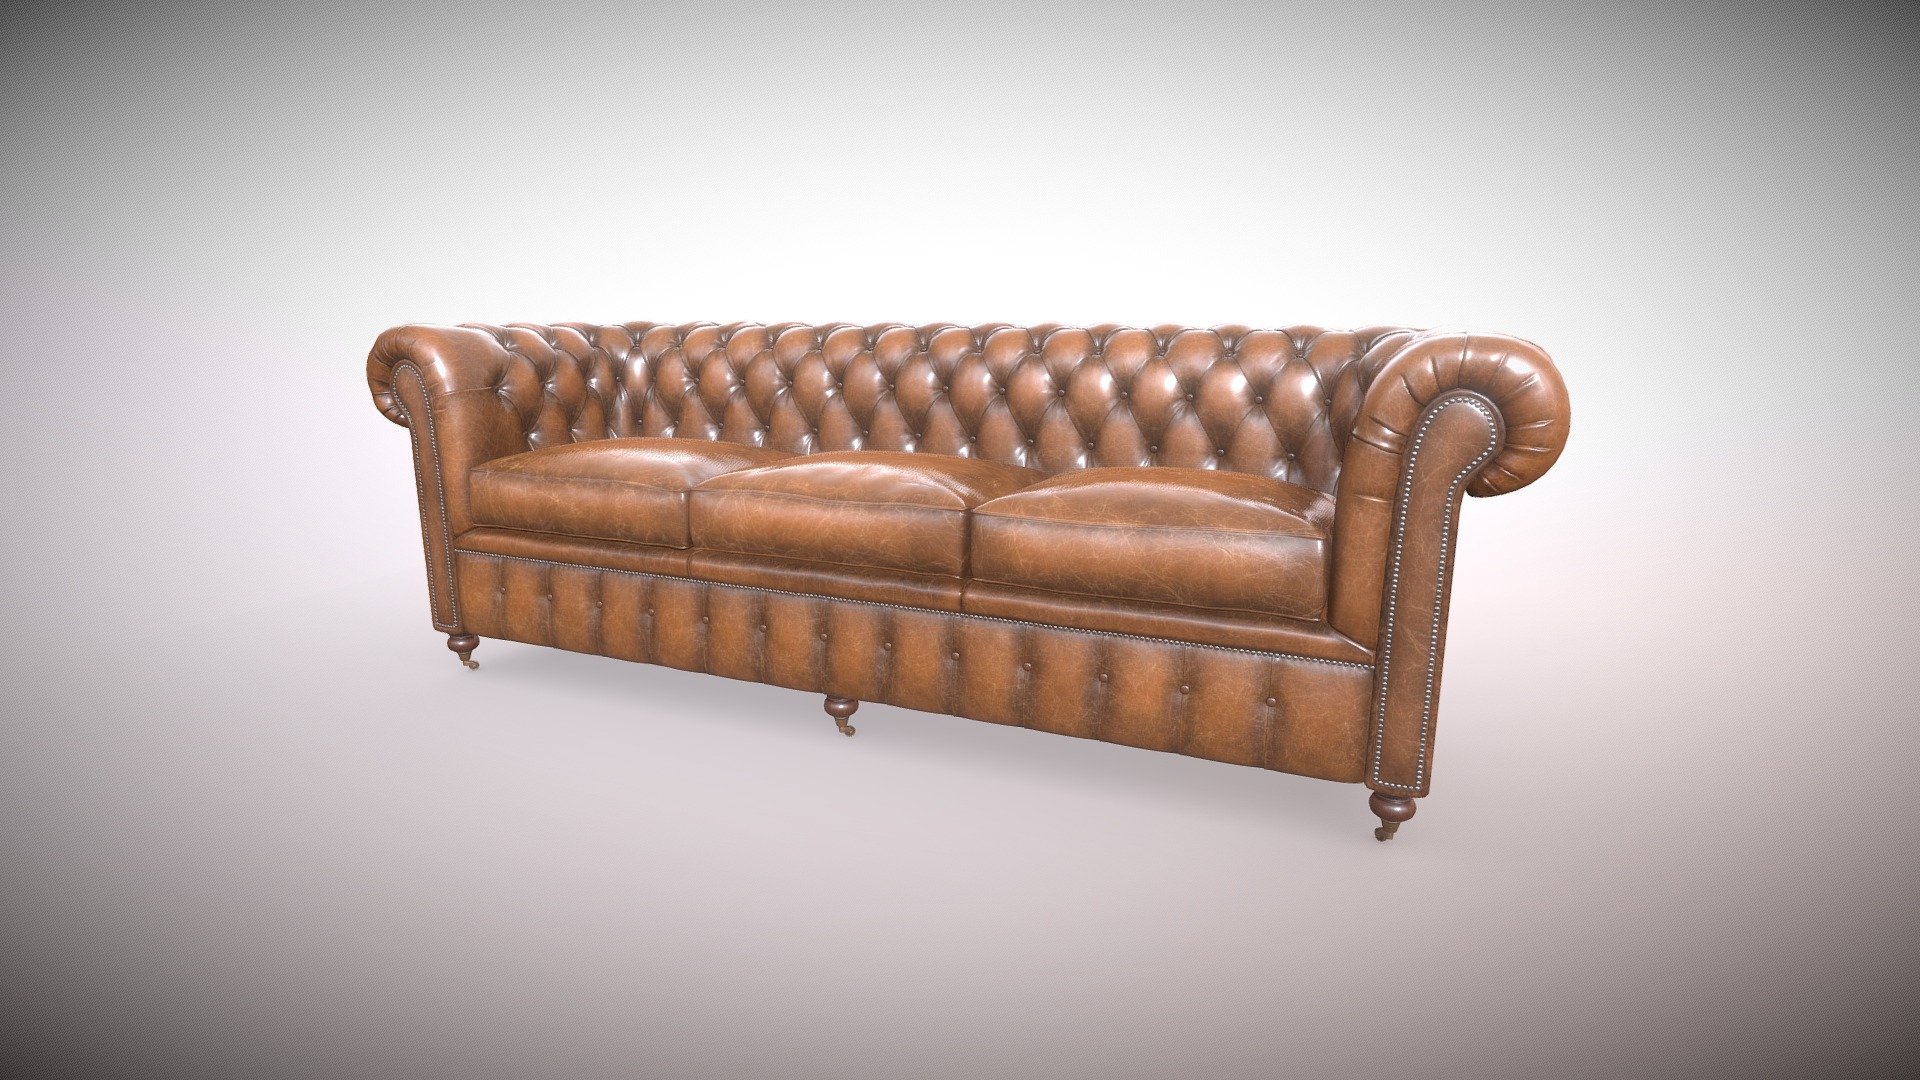 This is an accurate model of the classic Chesterfield sofa, the 3-seater brown aged leather version. All modelling was done based on real-life references and dimensions with care and full details. Texturing was done in Substance Painter. 
This is the perfect asset for your interior archviz shots.
Obj and blend files are included 3d model